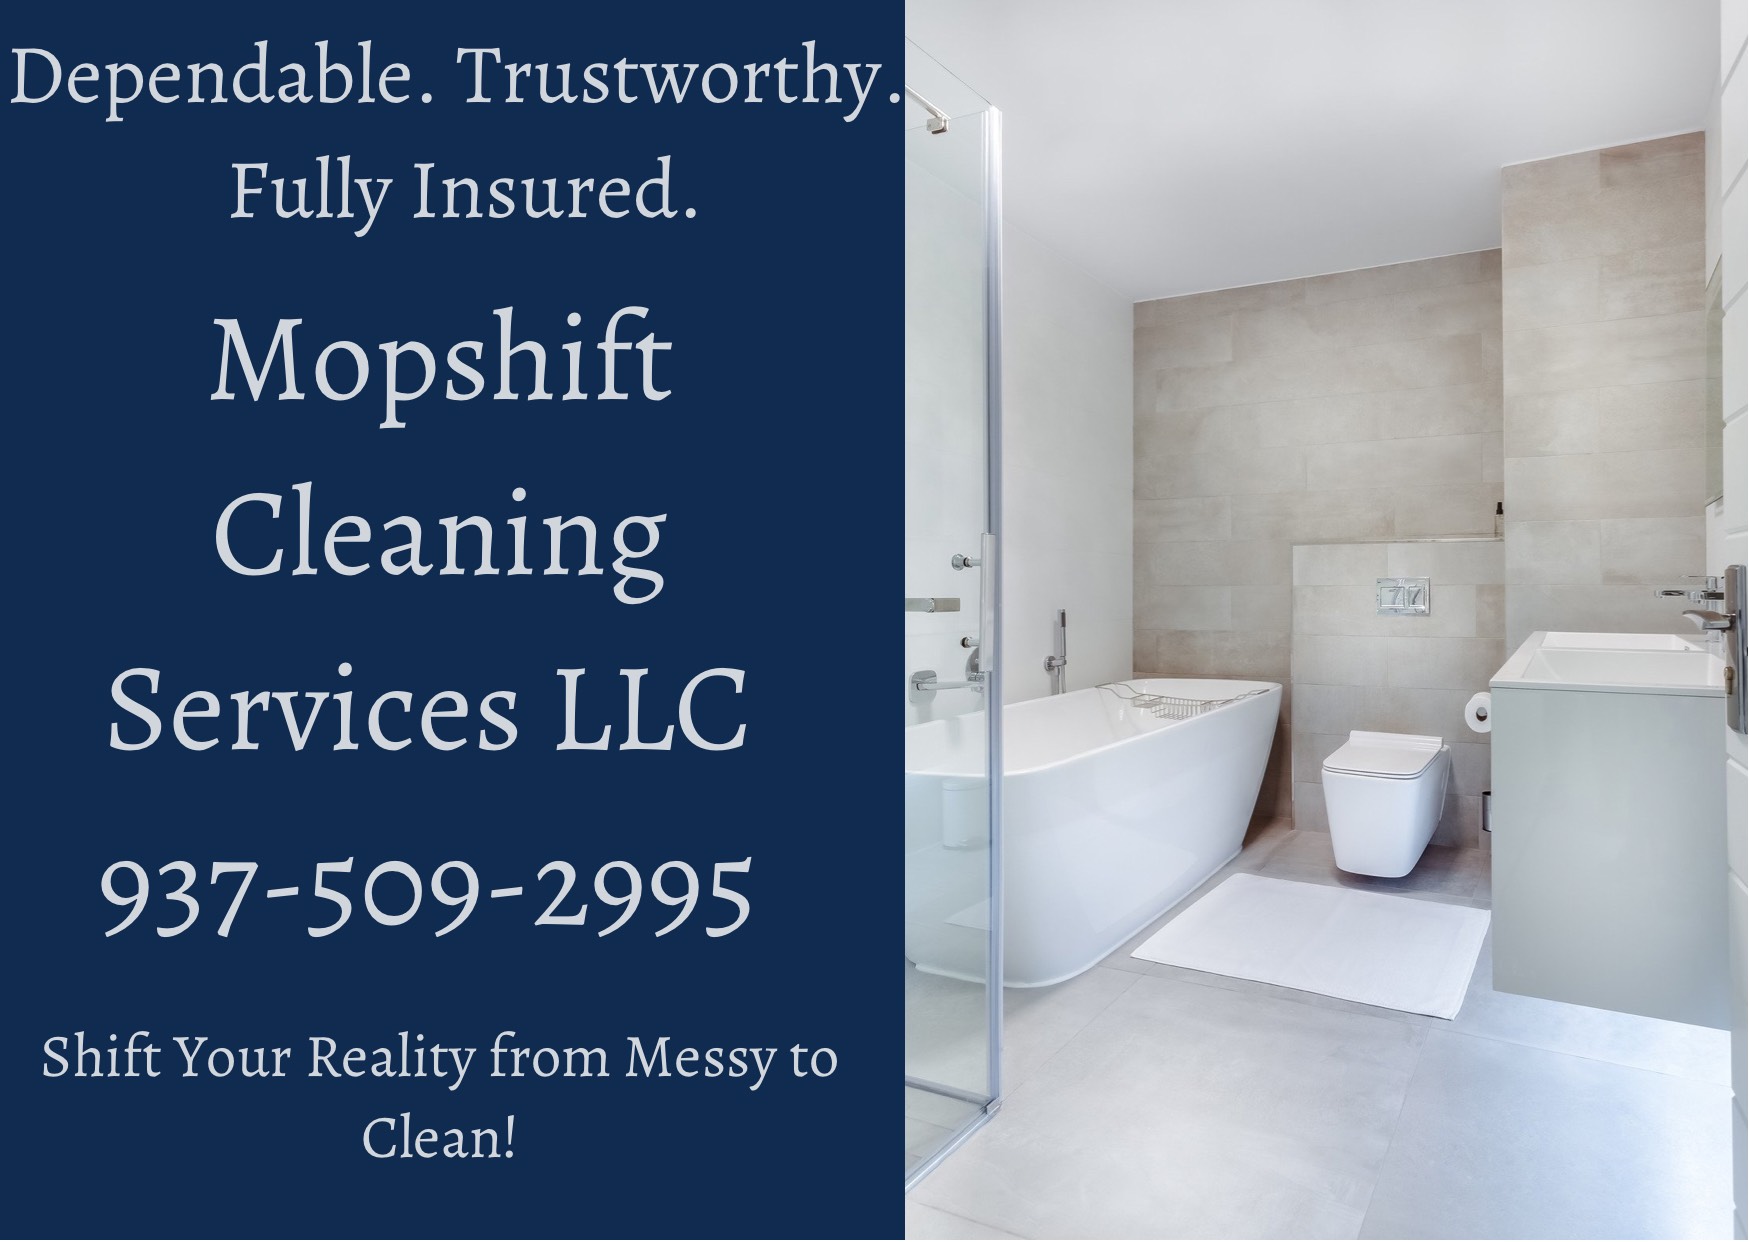 Mopshift Cleaning Services LLC advertisement